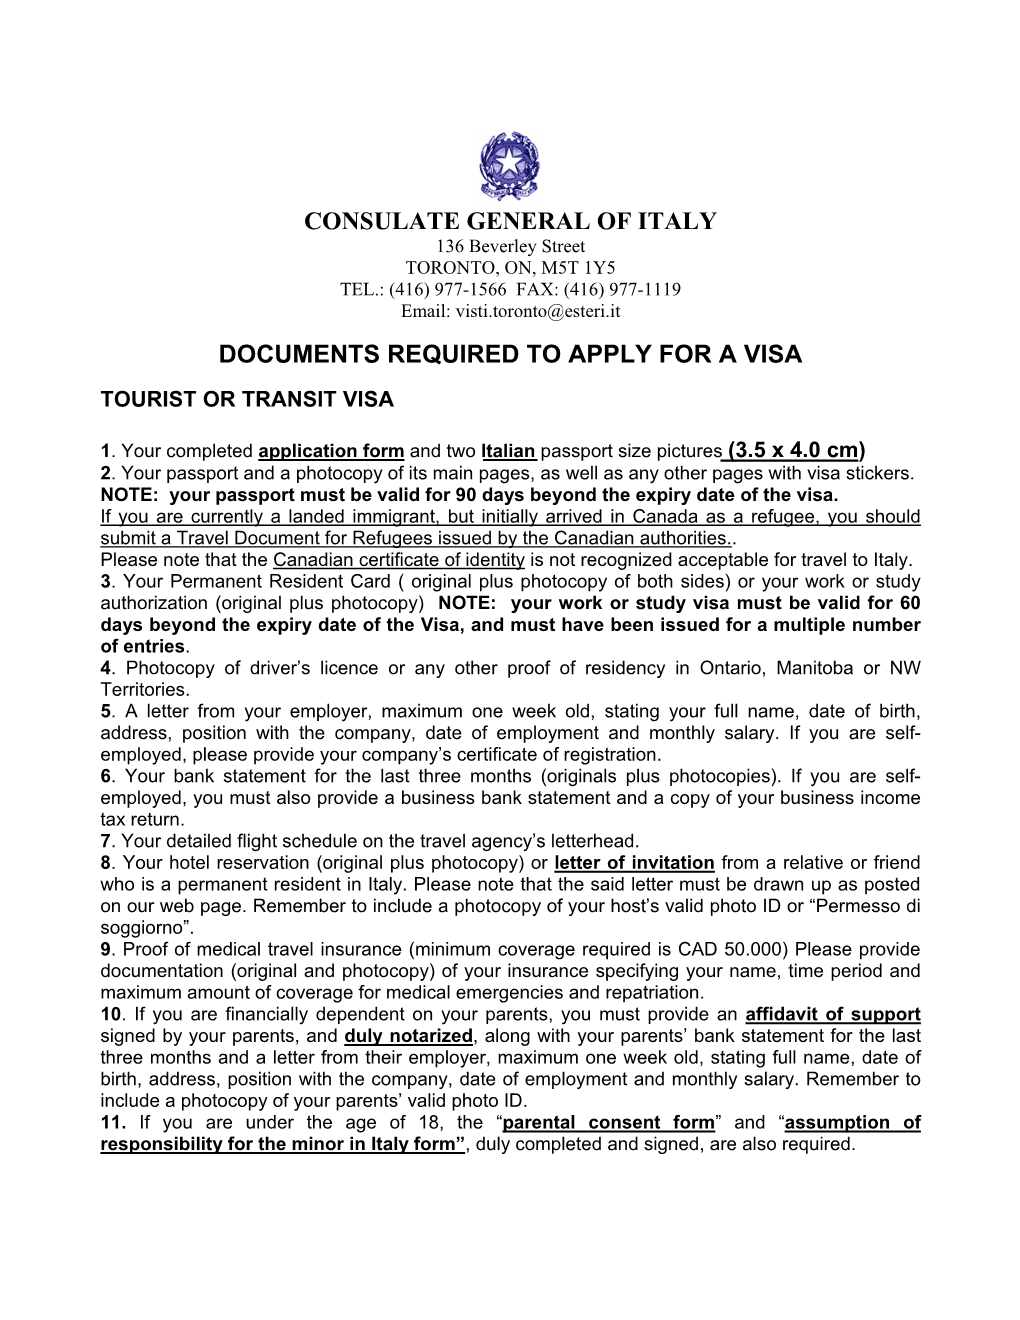 Consulate General of Italy Documents Required To